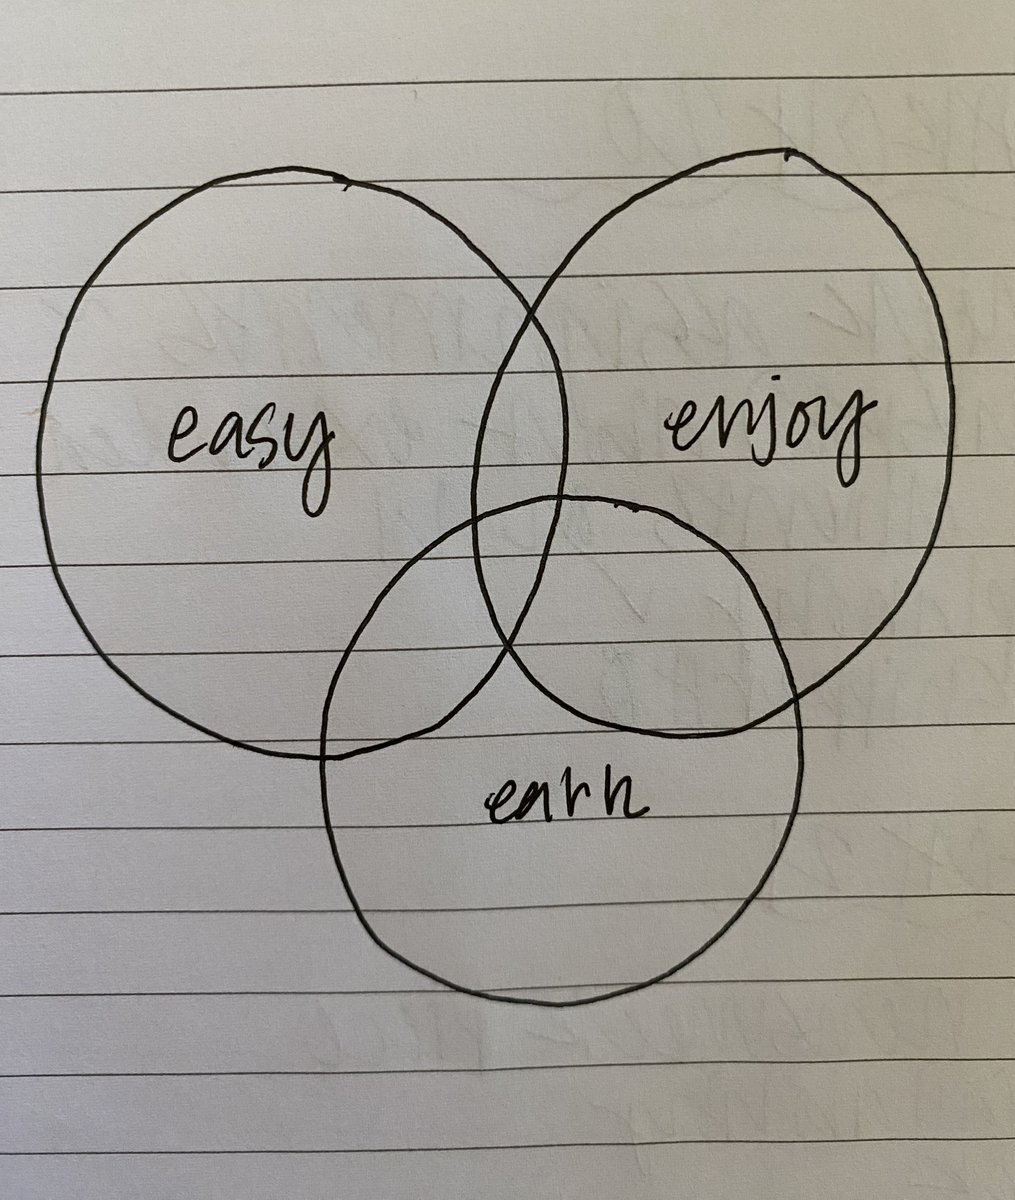 This poorly drawn venn diagram is the gut check exercise I use when evaluating new client opportunities 👇 Easy = is this something I’m good at? Enjoy = is this a topic/task I enjoy? Earn = is this a rate I’m happy with?